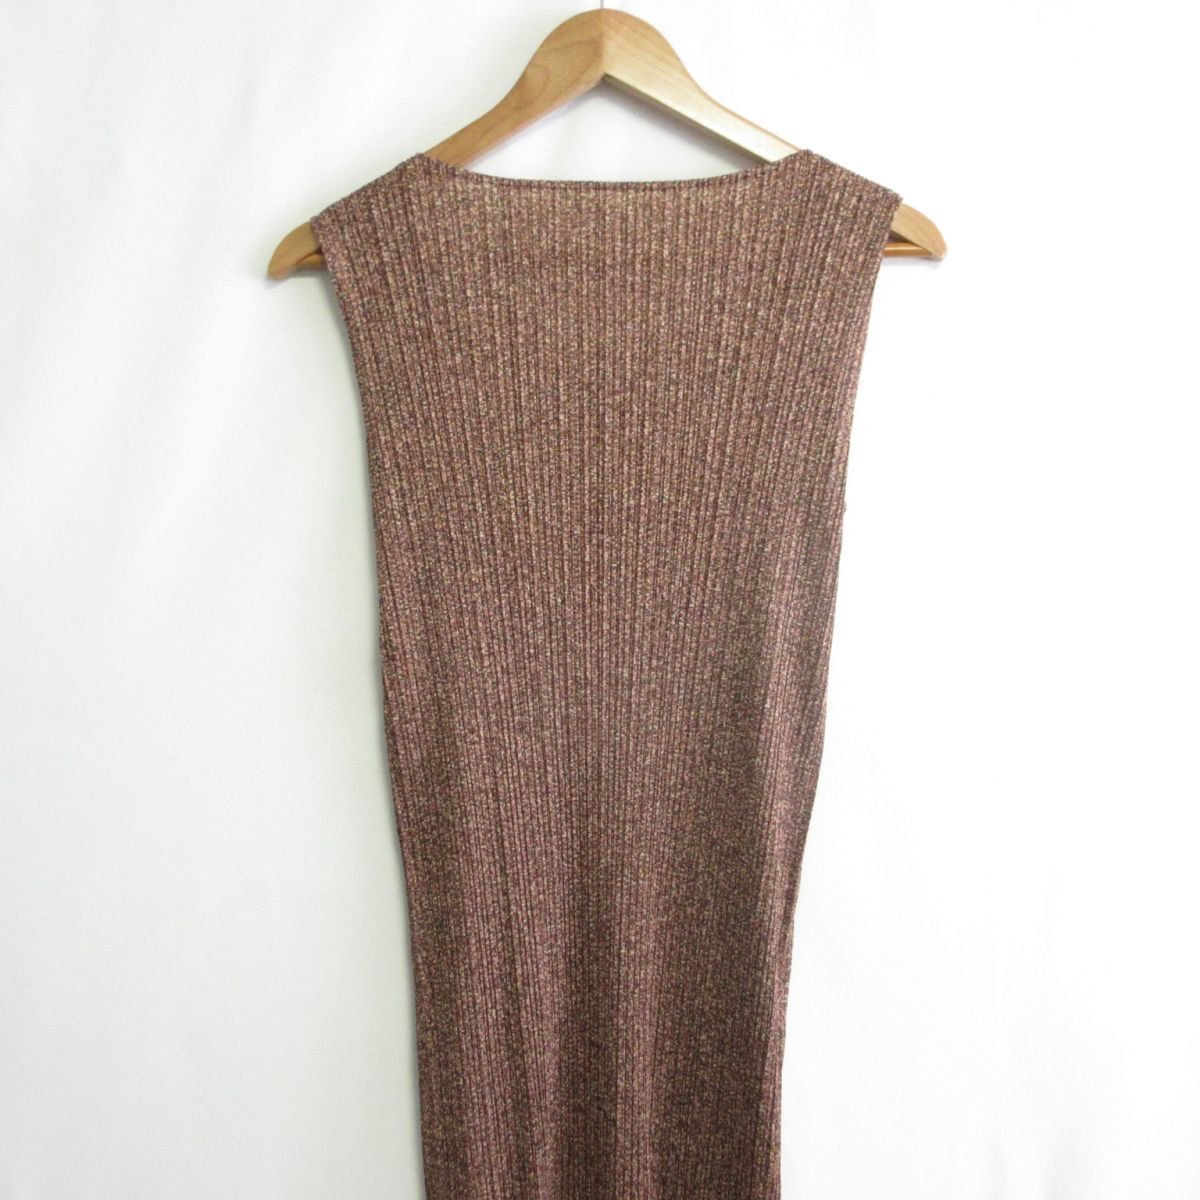  beautiful goods PLEATS PLEASE ISSEY MIYAKE pleat pulley z Issey Miyake leopard print no sleeve maxi height pleat One-piece 2 brown group *